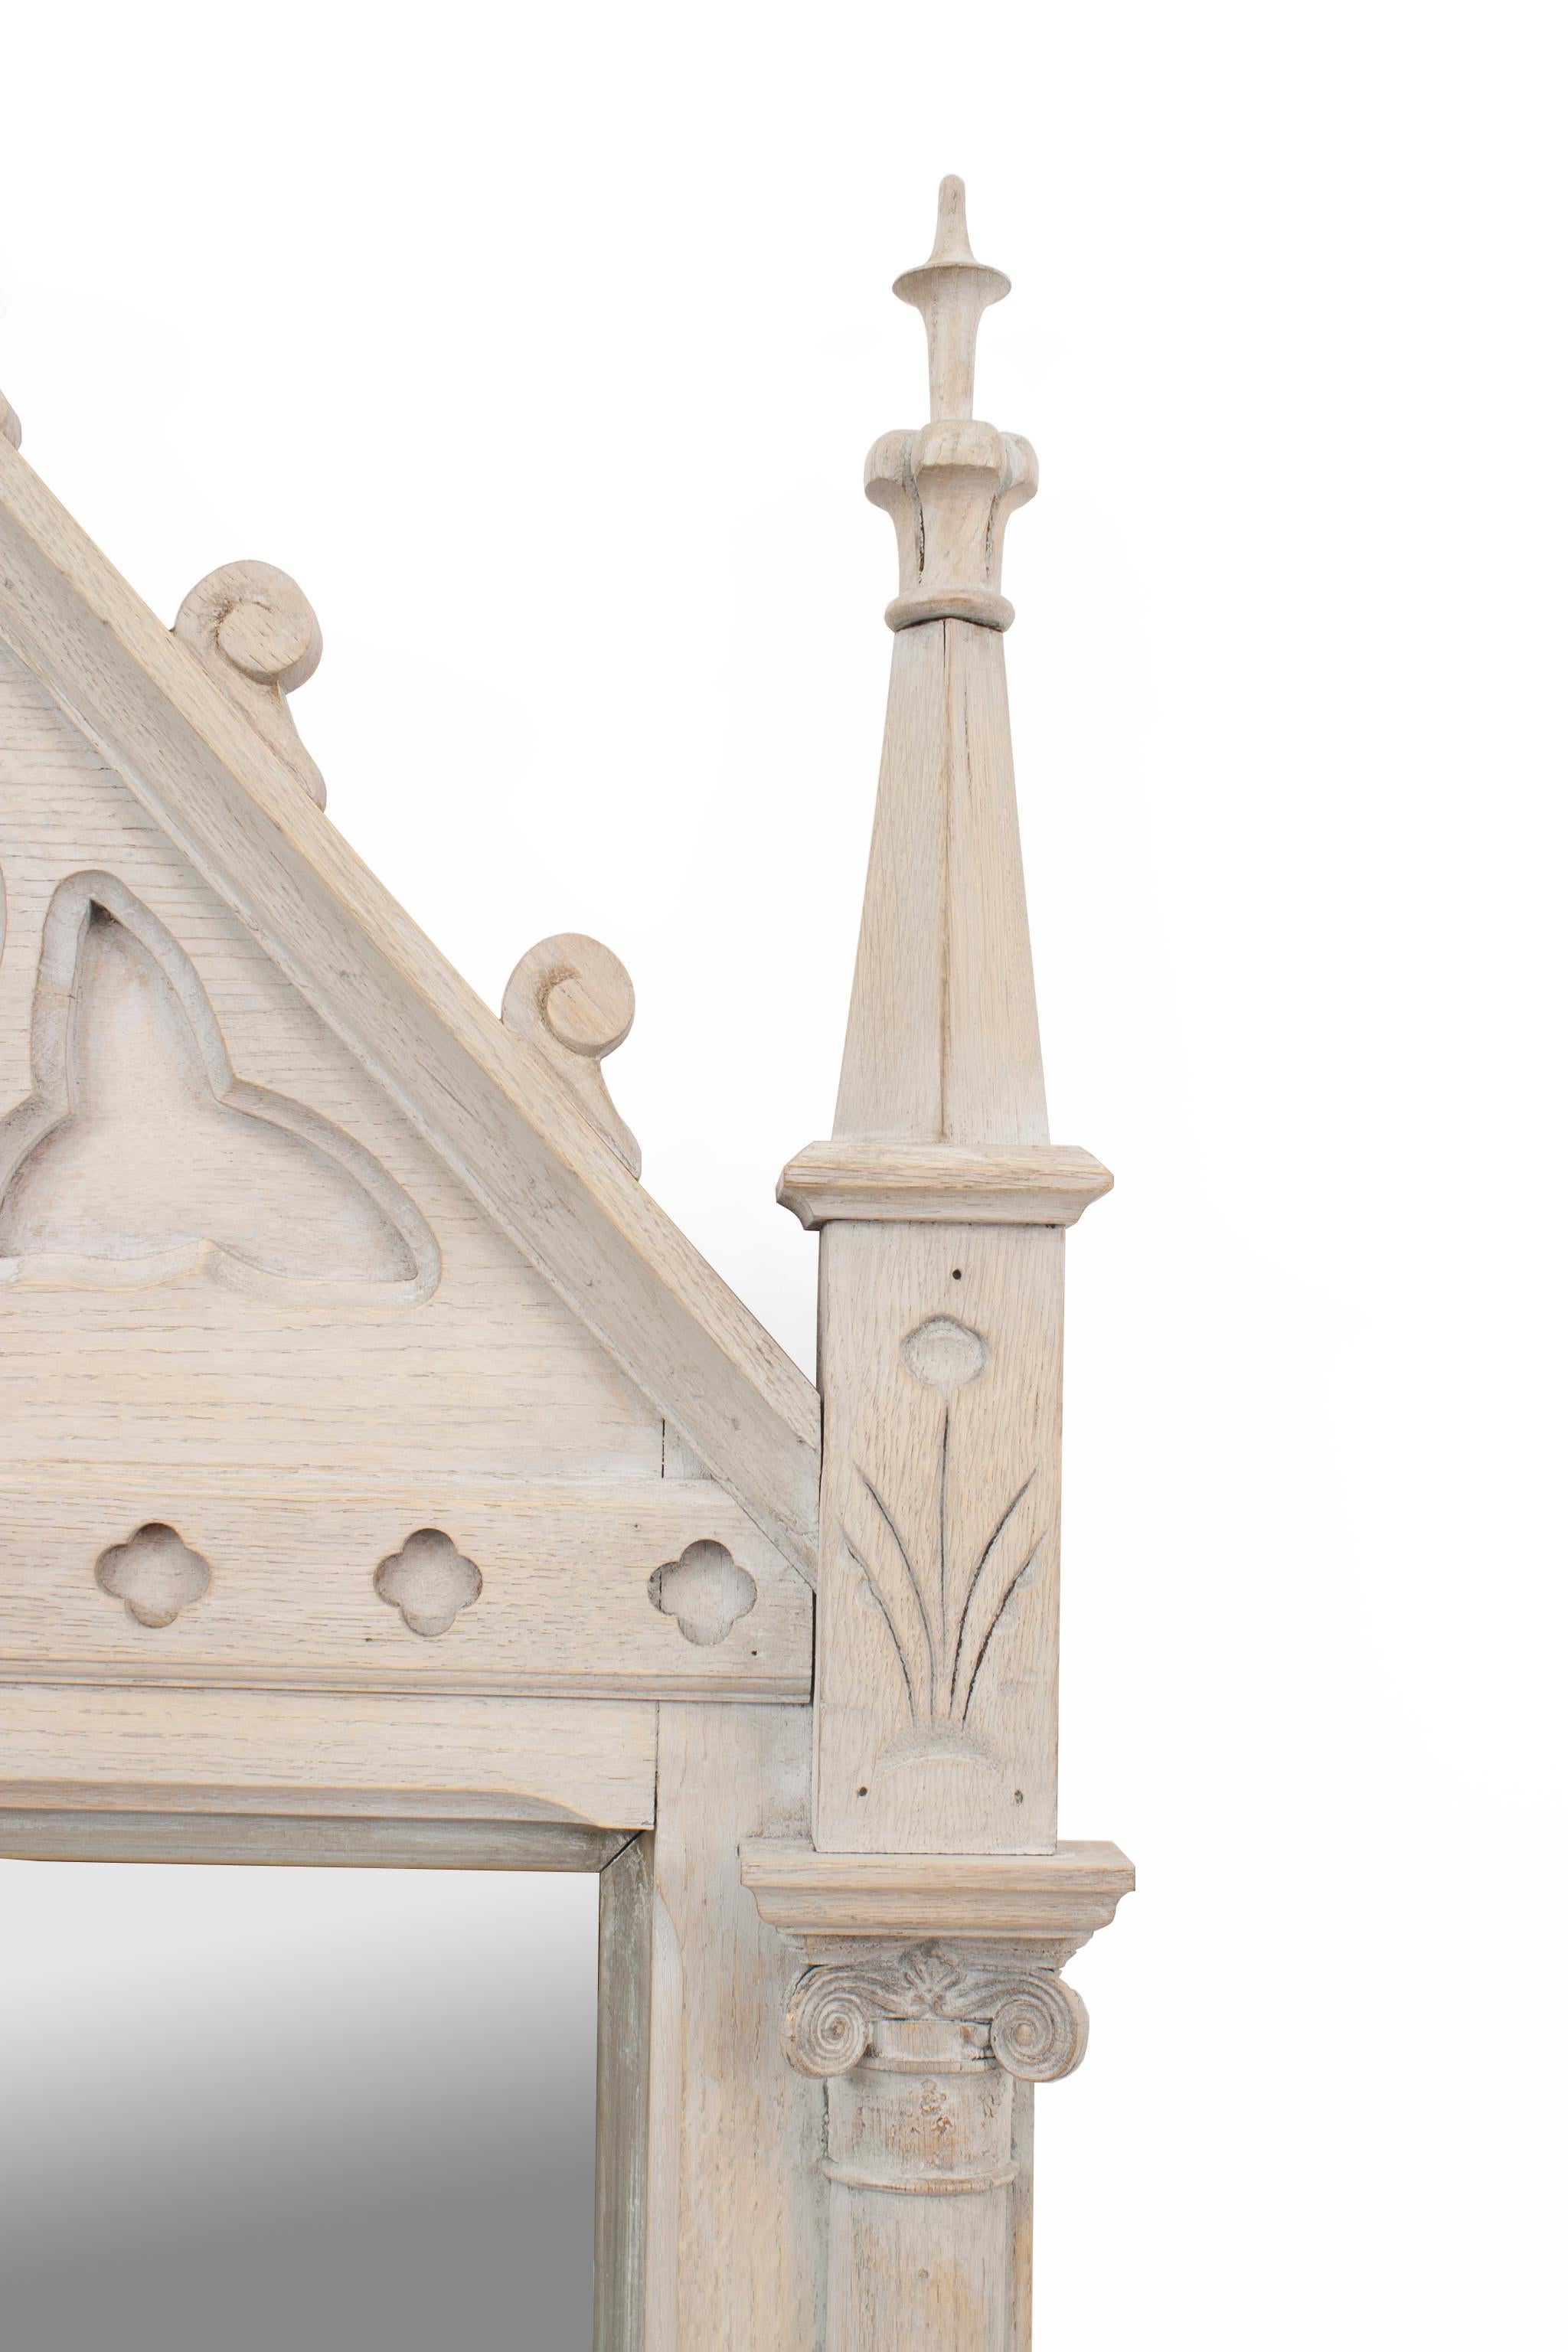 English Gothic Revival (late 19th century) bleached oak wall mirror with column sides ending in finials centring an arch frame with cut-out design.
 